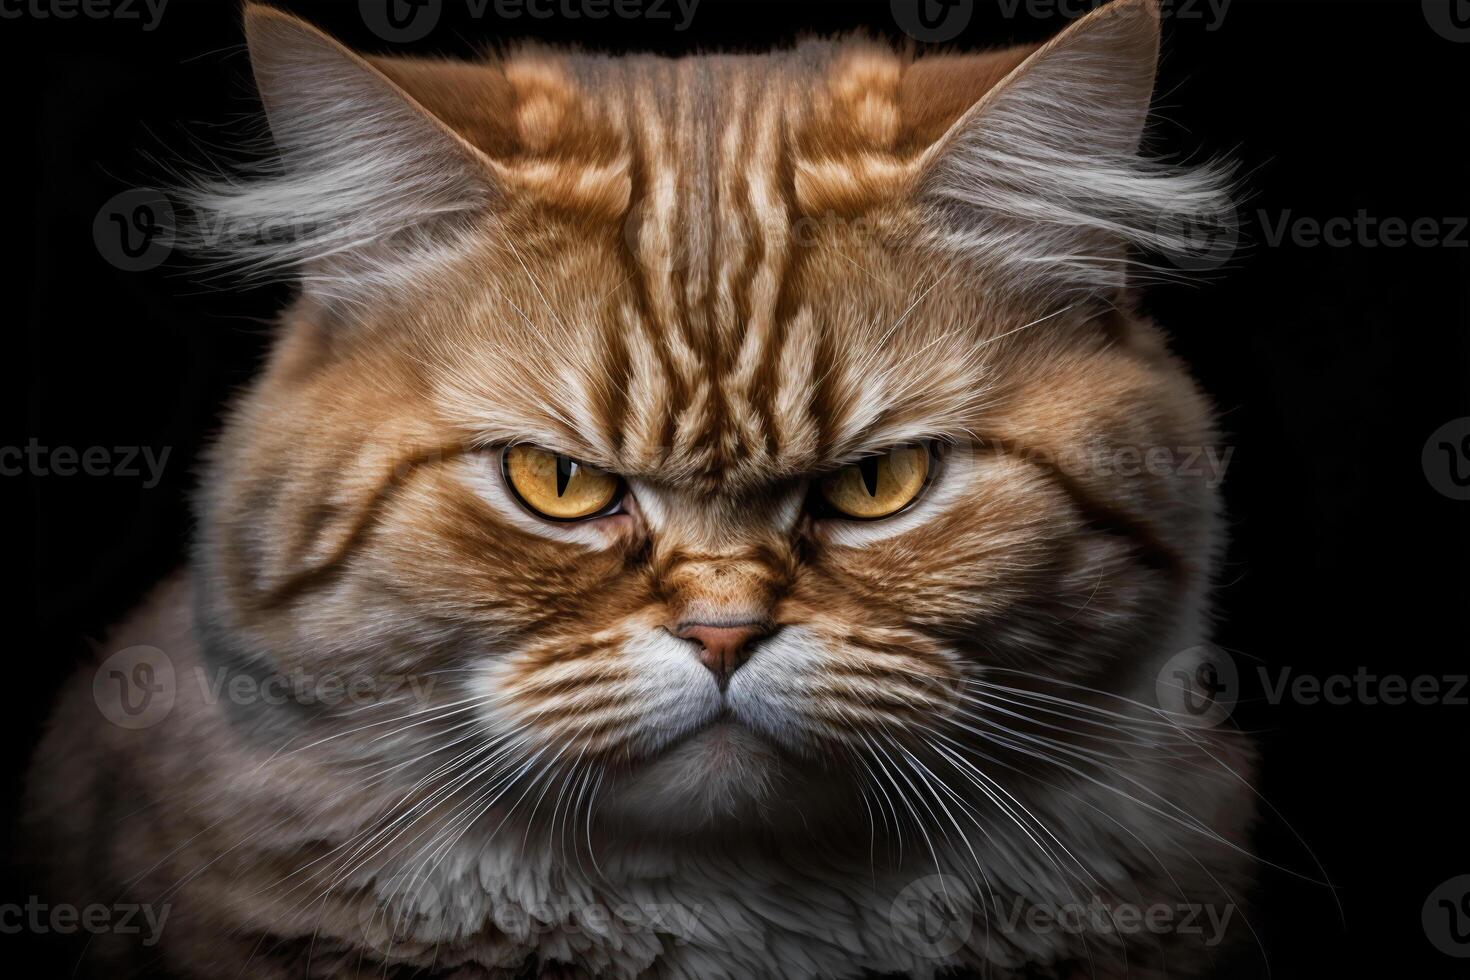 Boss #angry #cat #win #faces #faced #shutup #shut #up #fa…